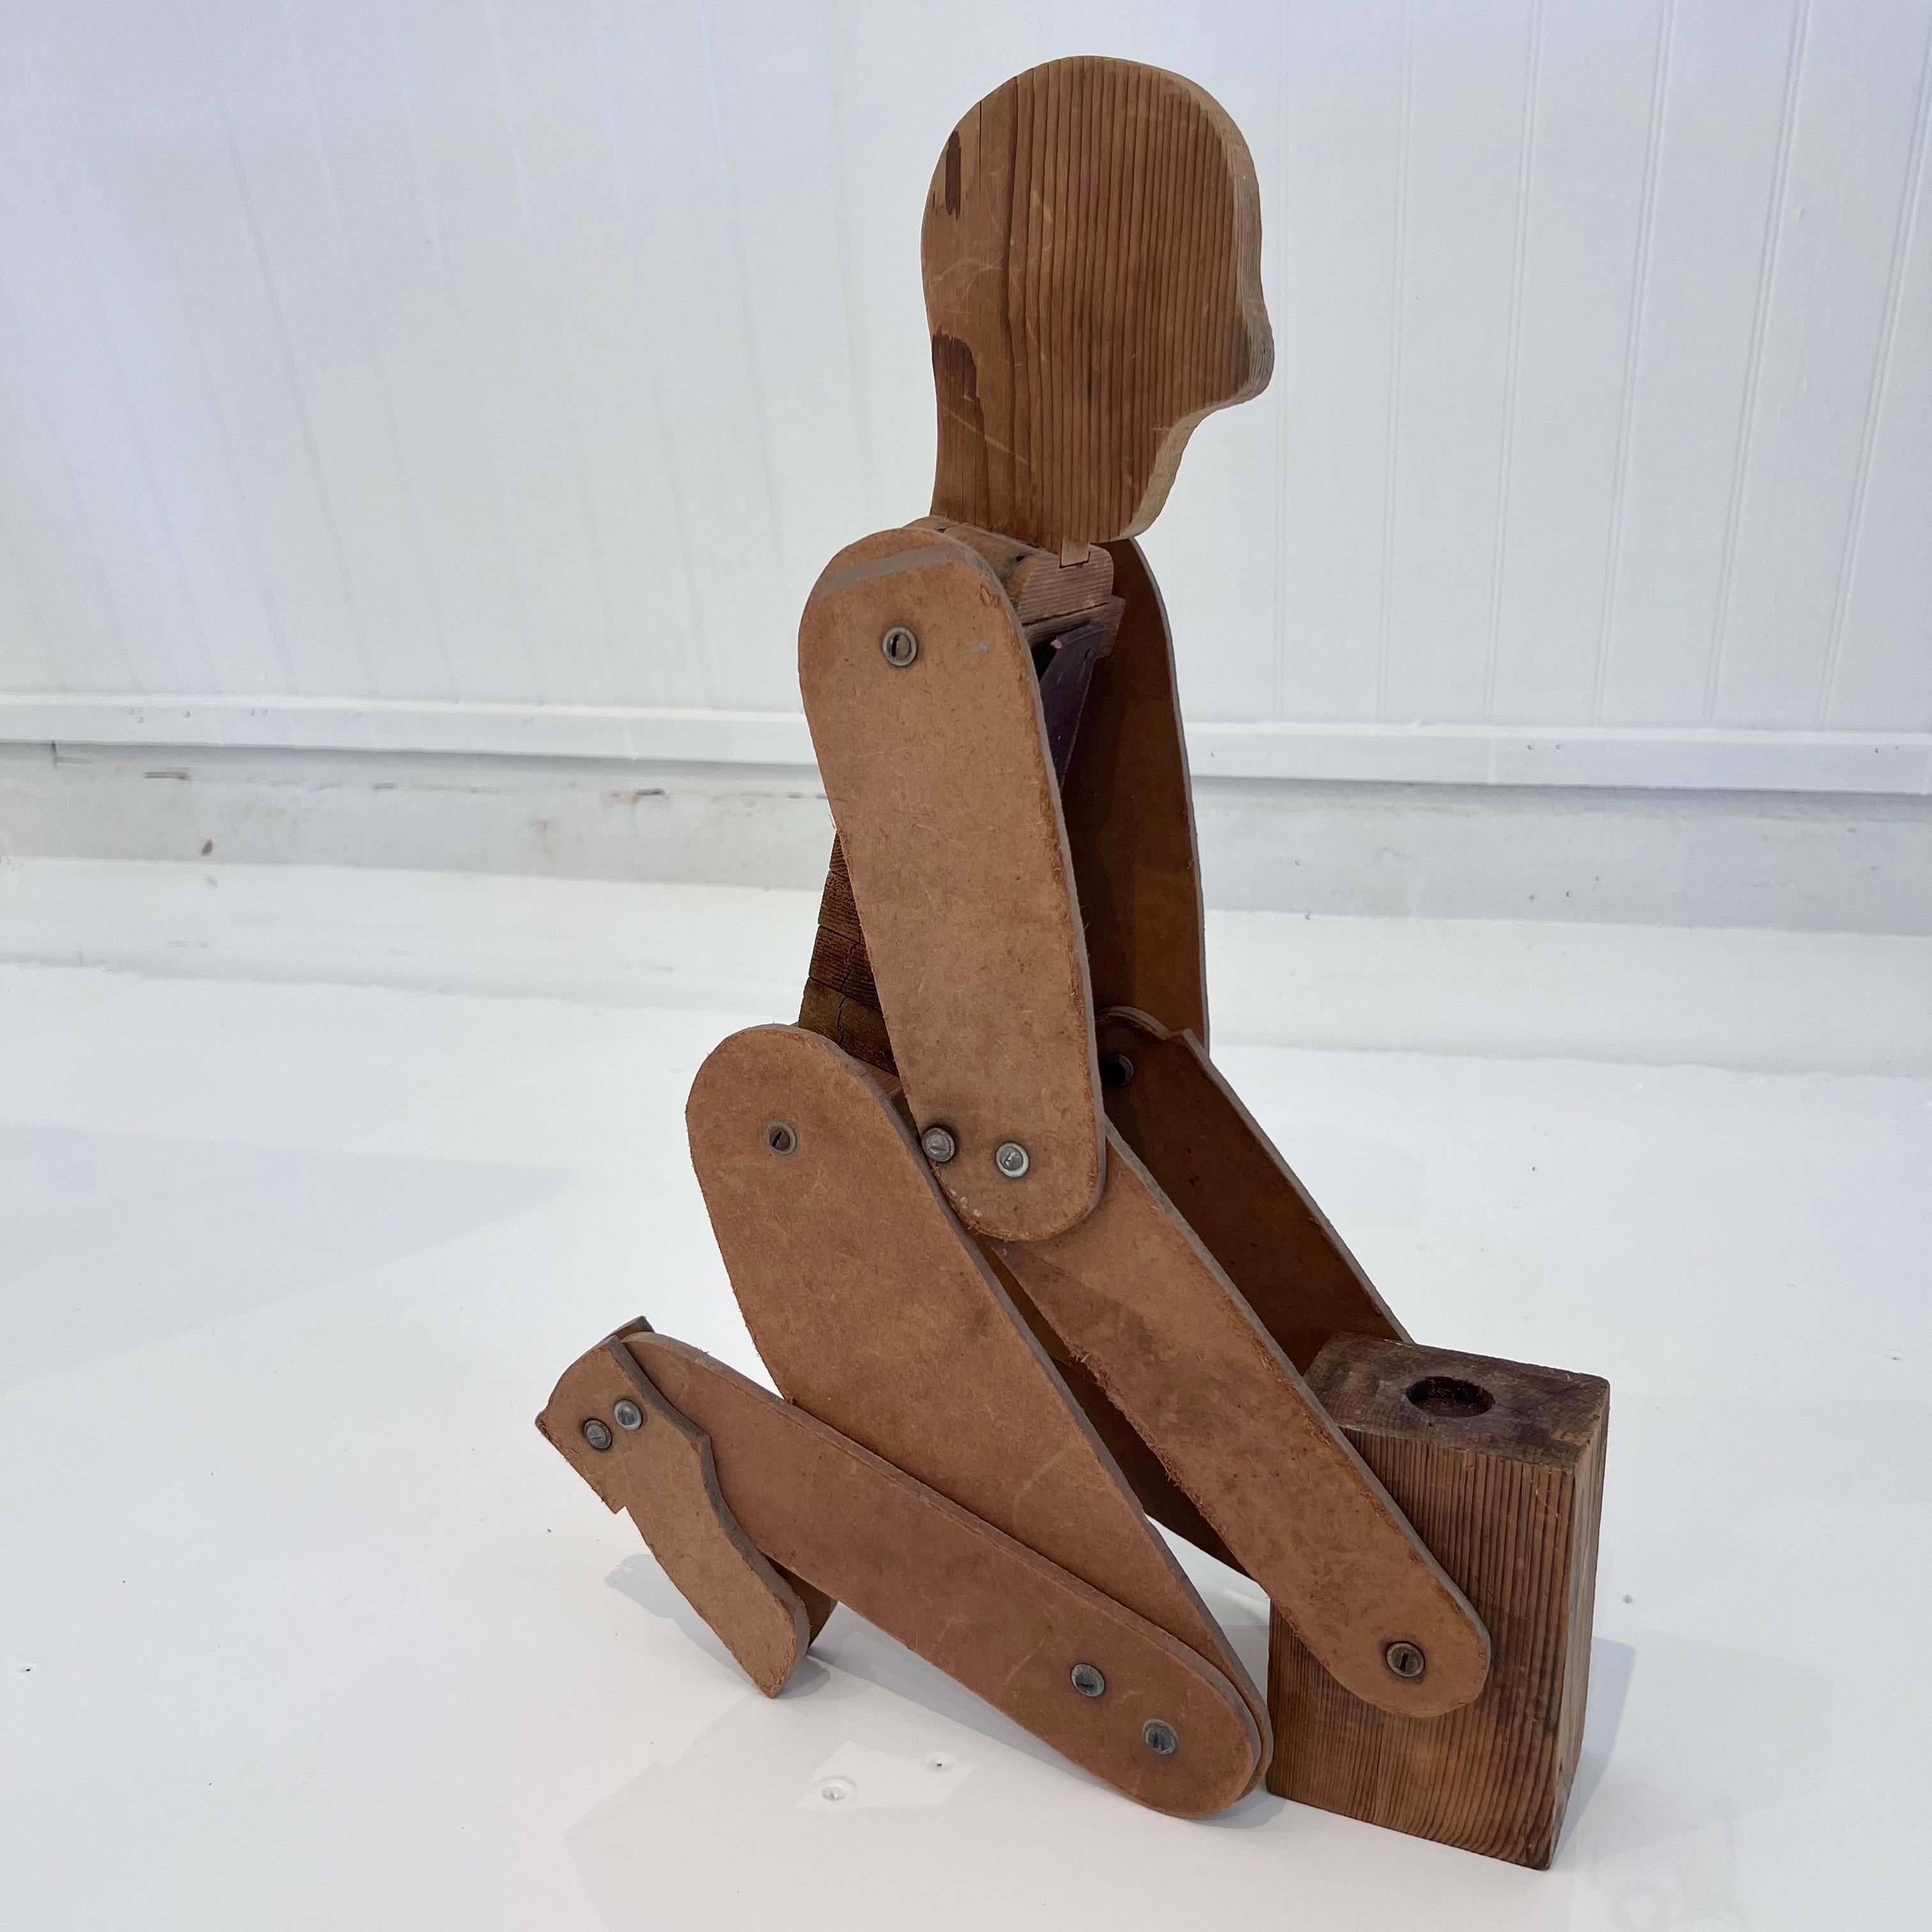 Handmade Folk Art Articulated Wooden Figure, 1950s USA In Good Condition For Sale In Los Angeles, CA